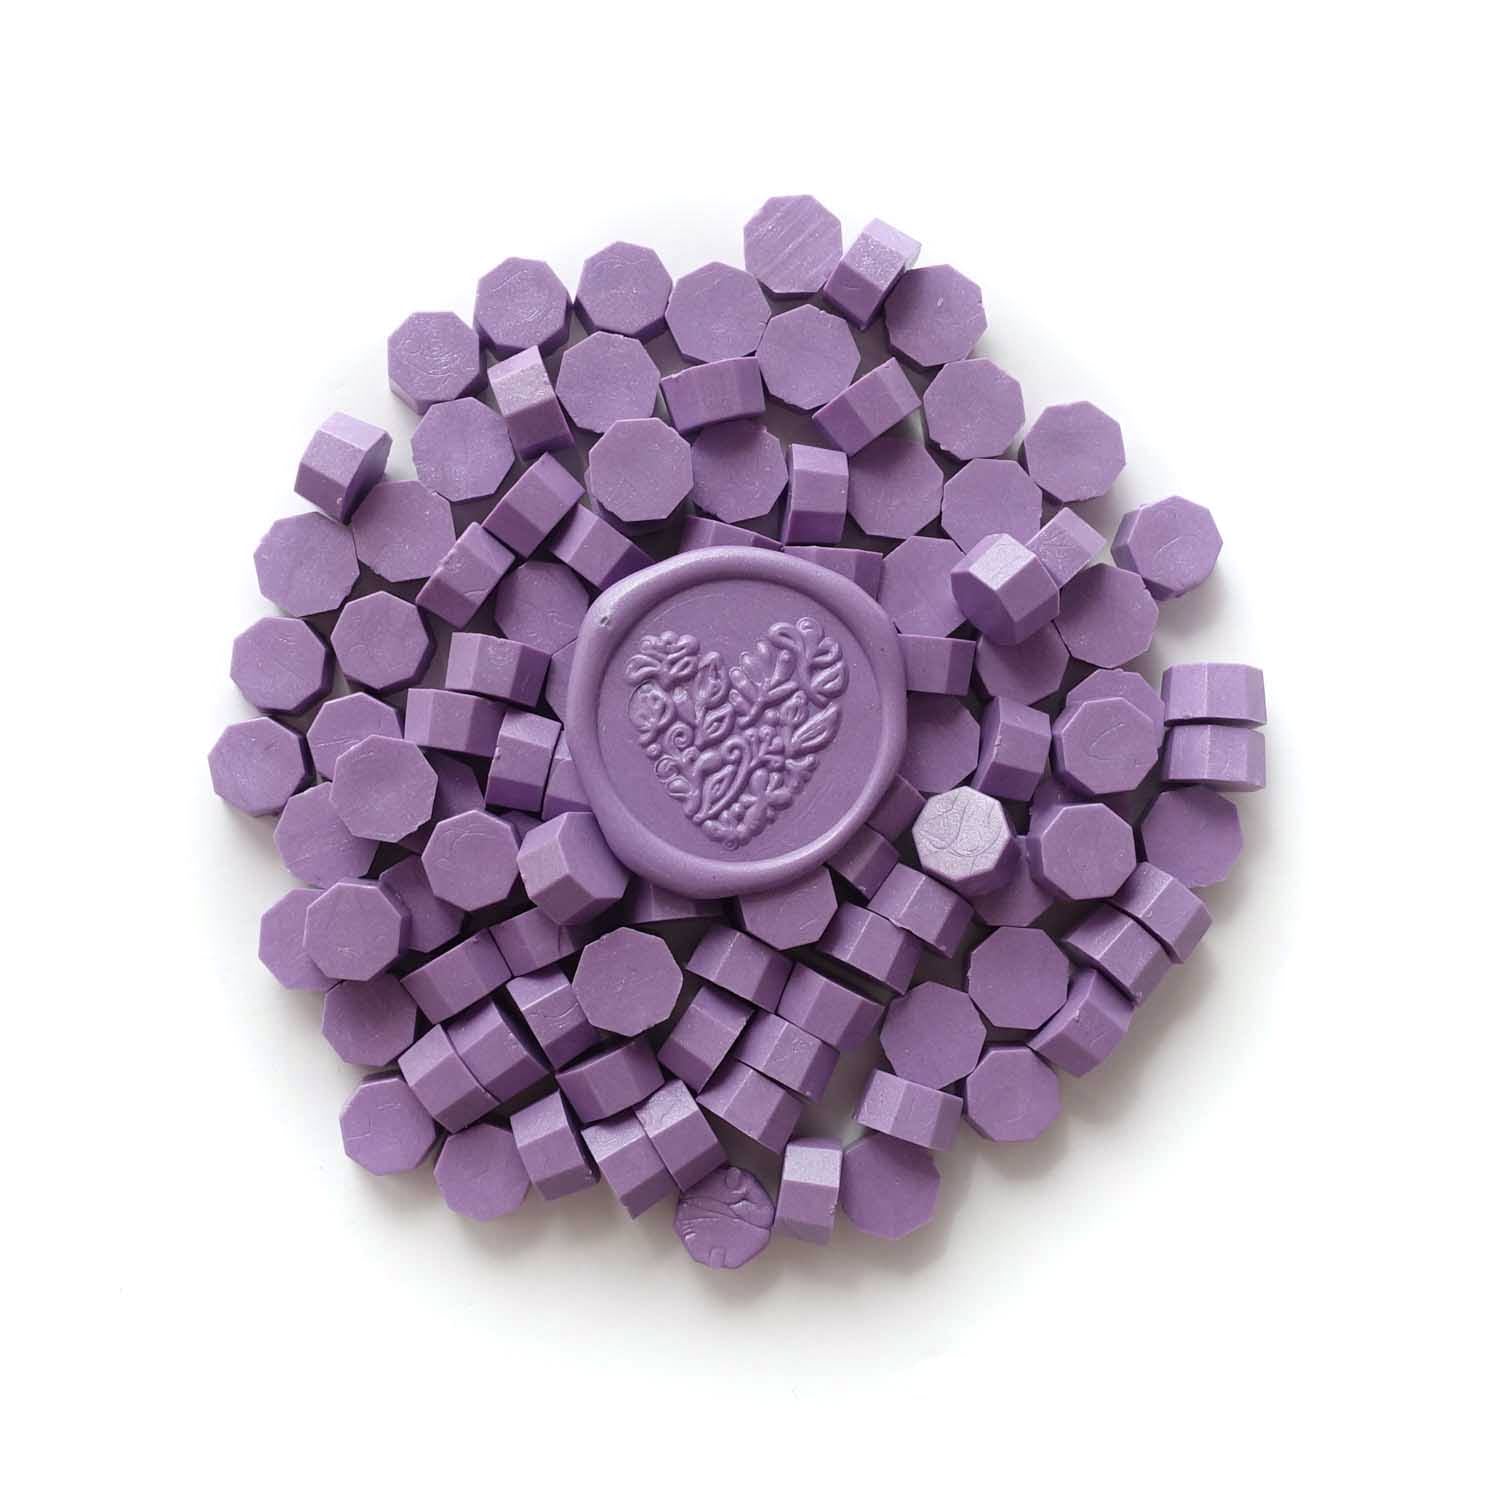 Pale light purple lilac lavender wax seal with wild flower Fiona Ariva pellets